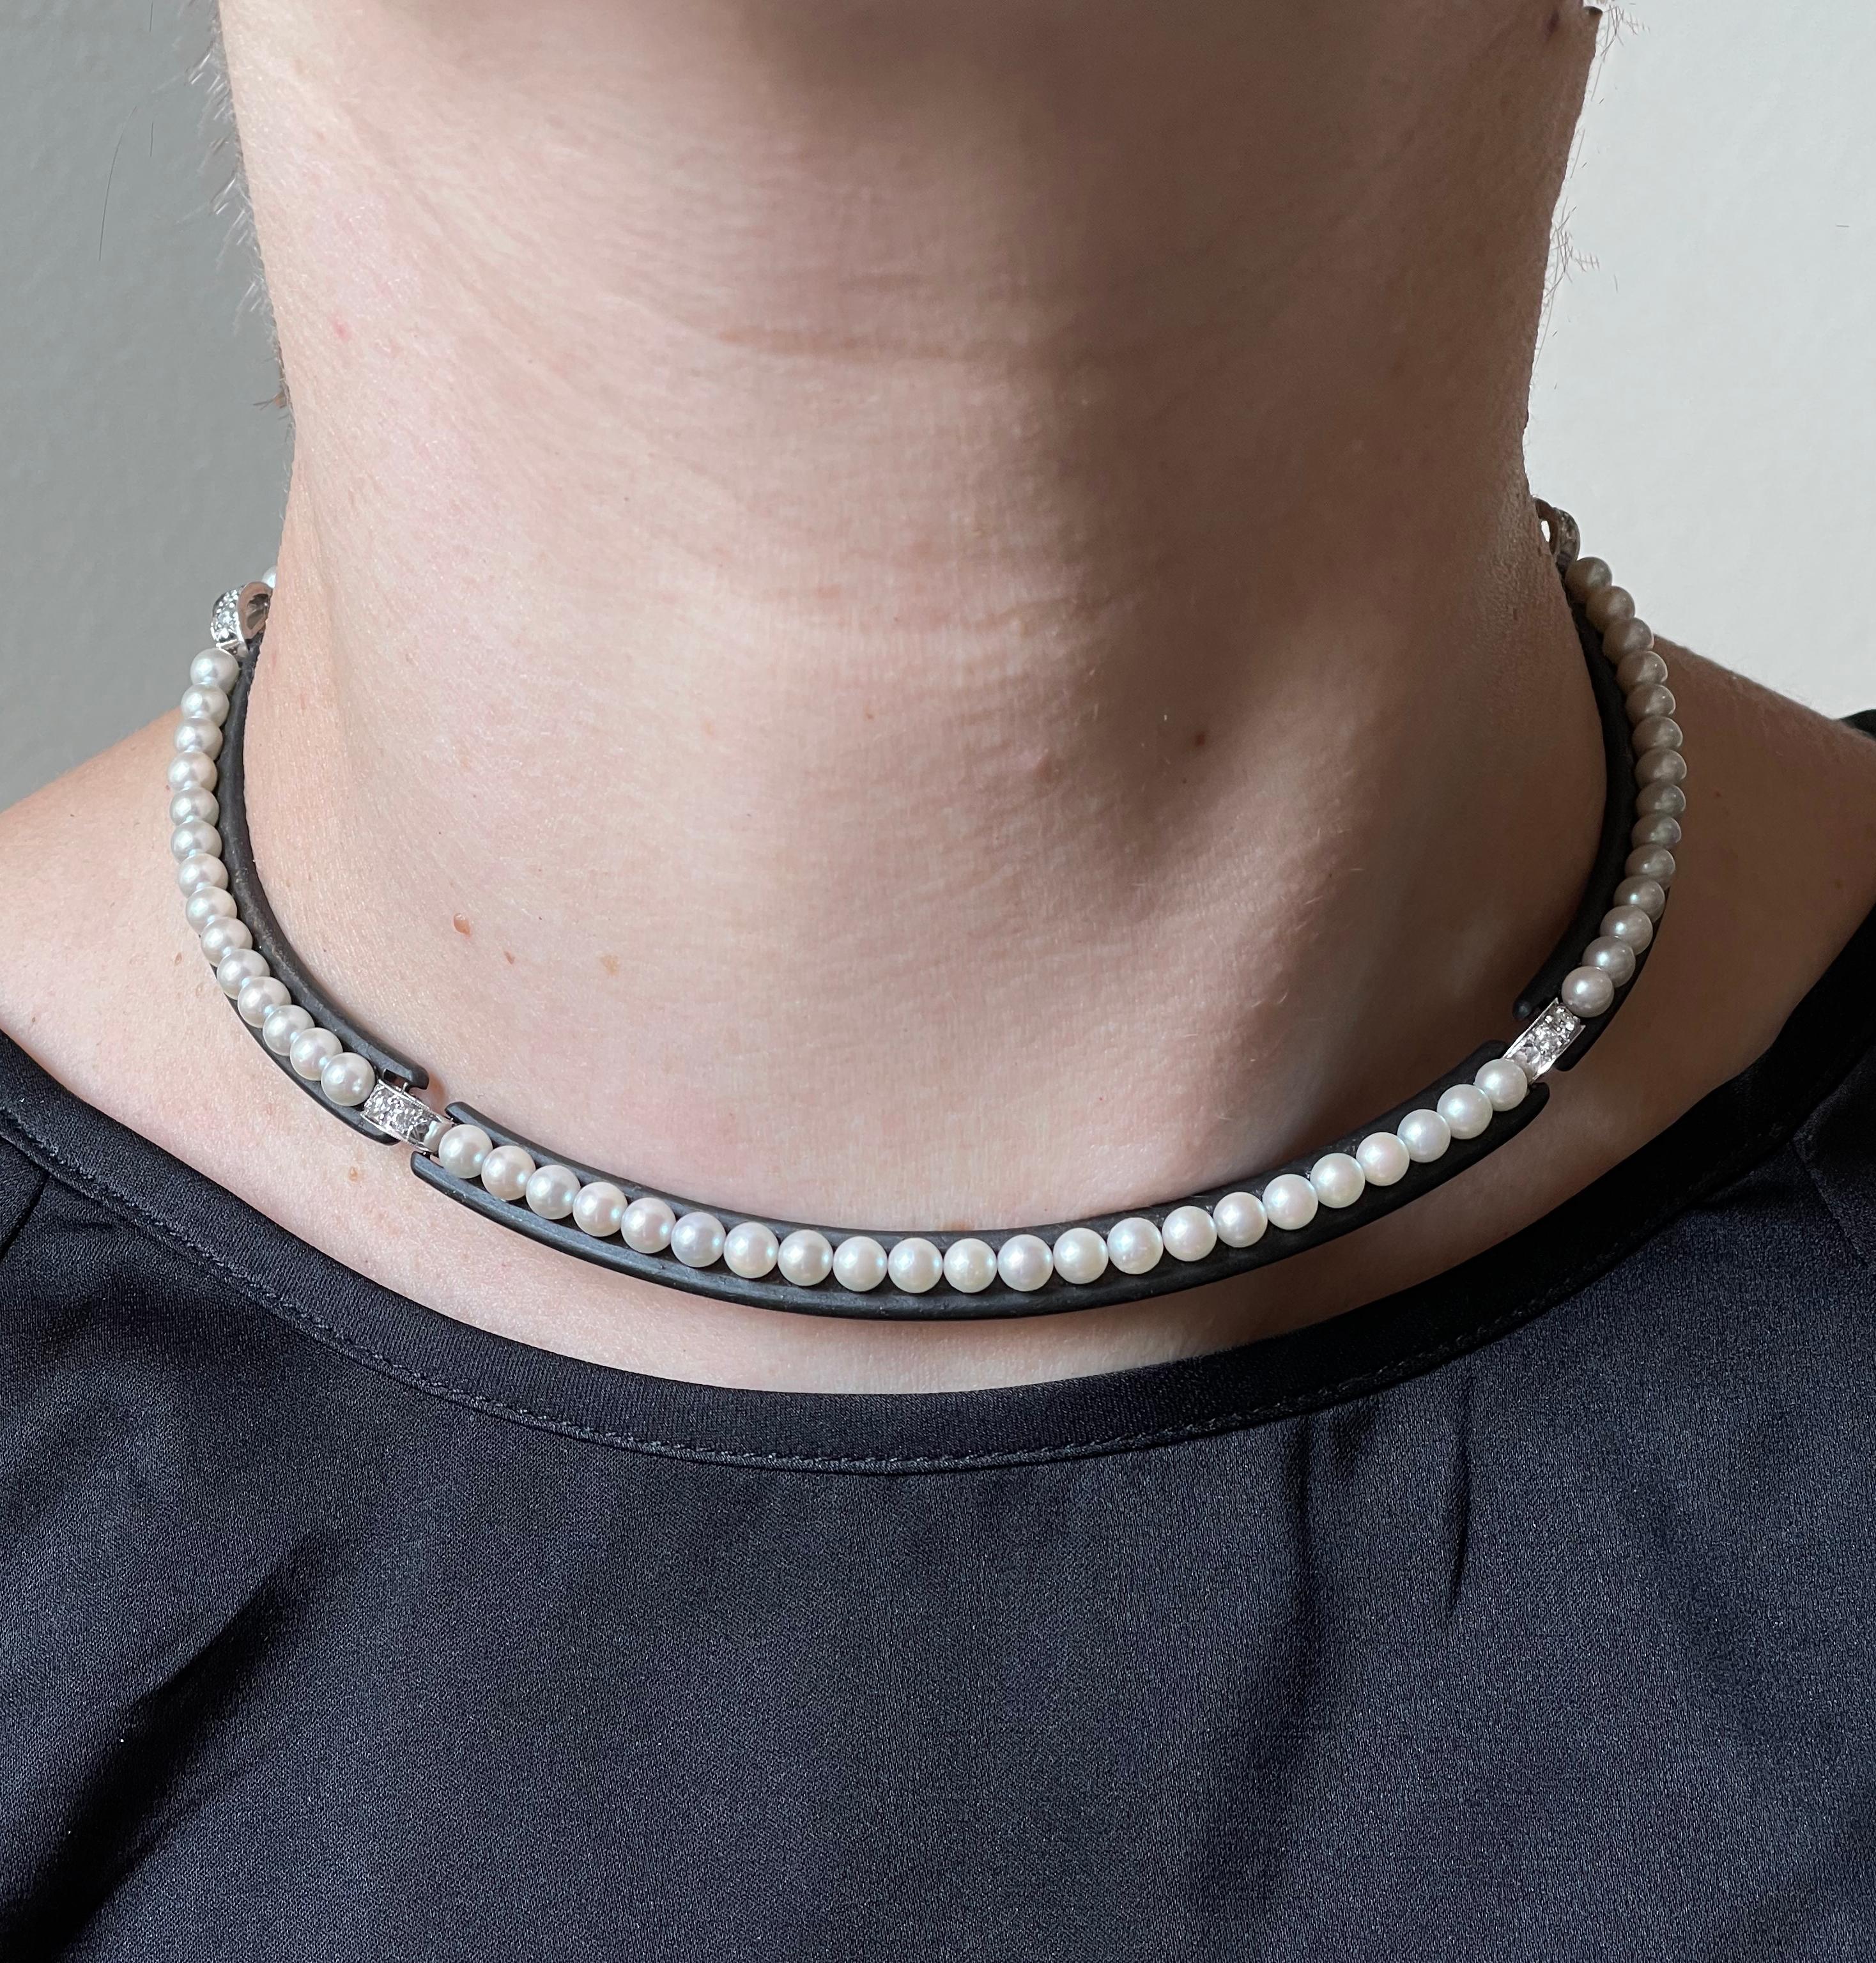 Iconic Art Deco Marsh & Co necklace, set in signature blackened steel, with gold accent links, adorned with 4.5mm pearls and approx. 0.80ctw in G/VS diamonds. The necklace is 16